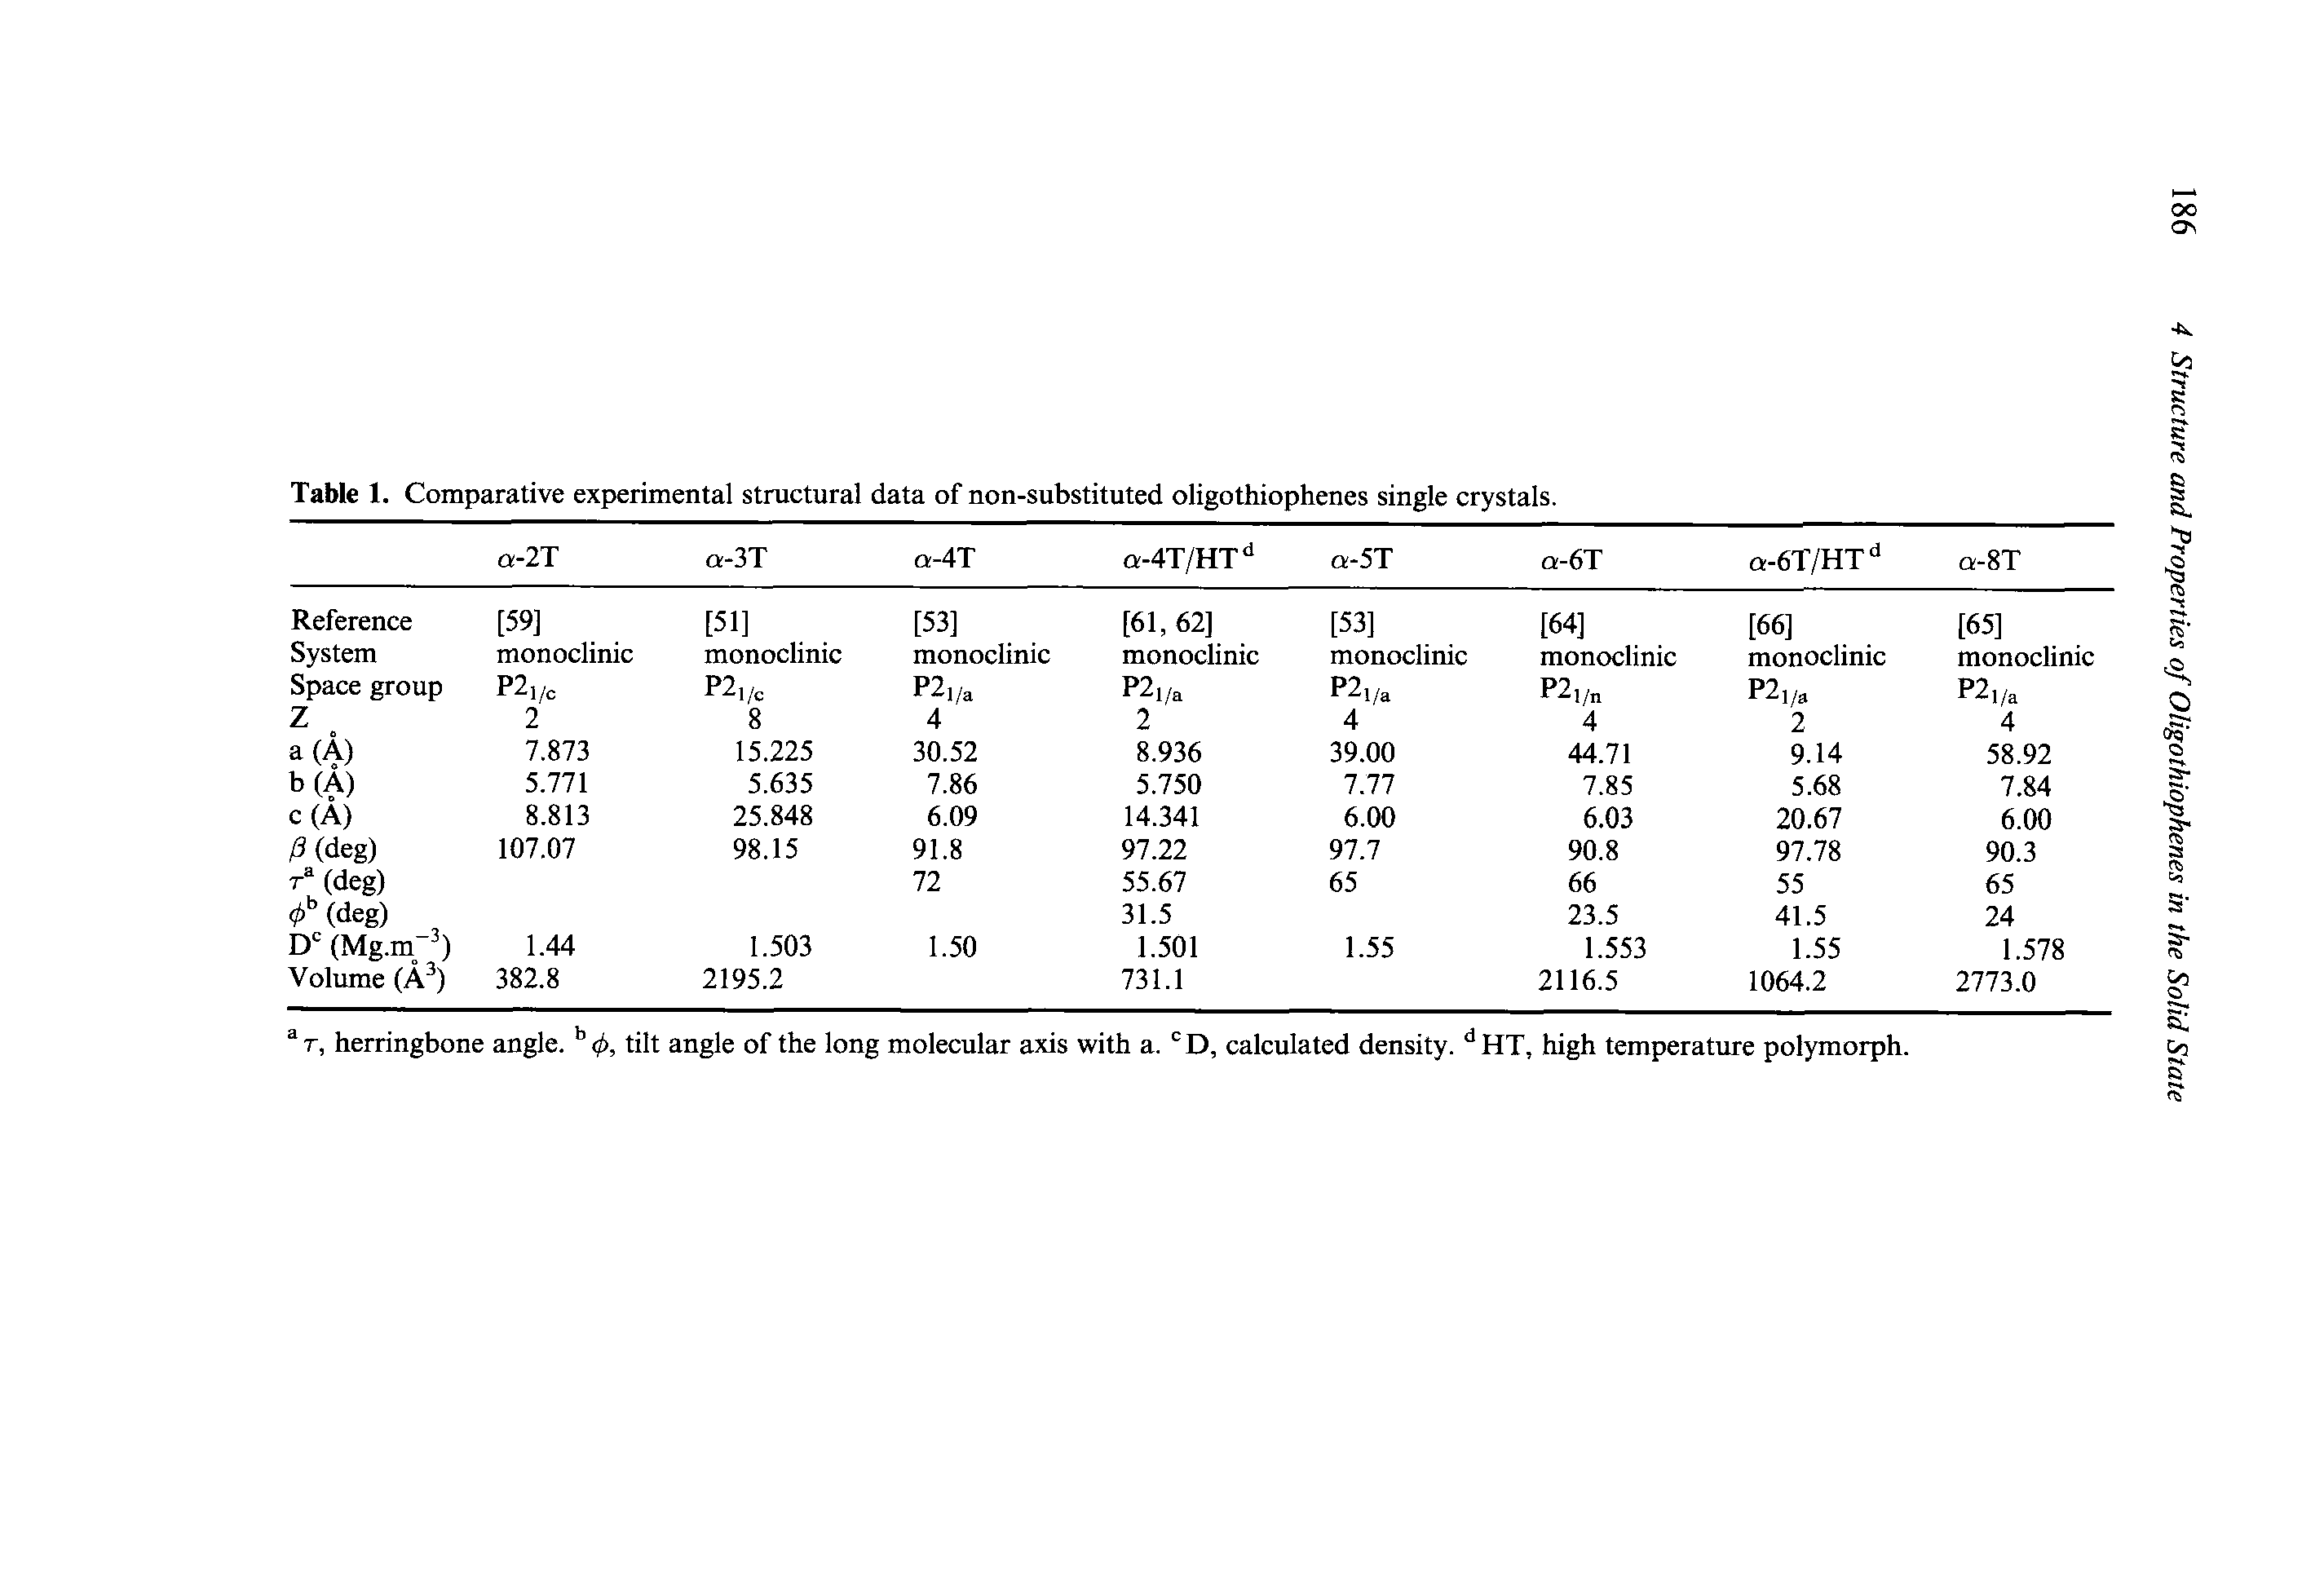 Table 1. Comparative experimental structural data of non-substituted oligothiophenes single crystals.